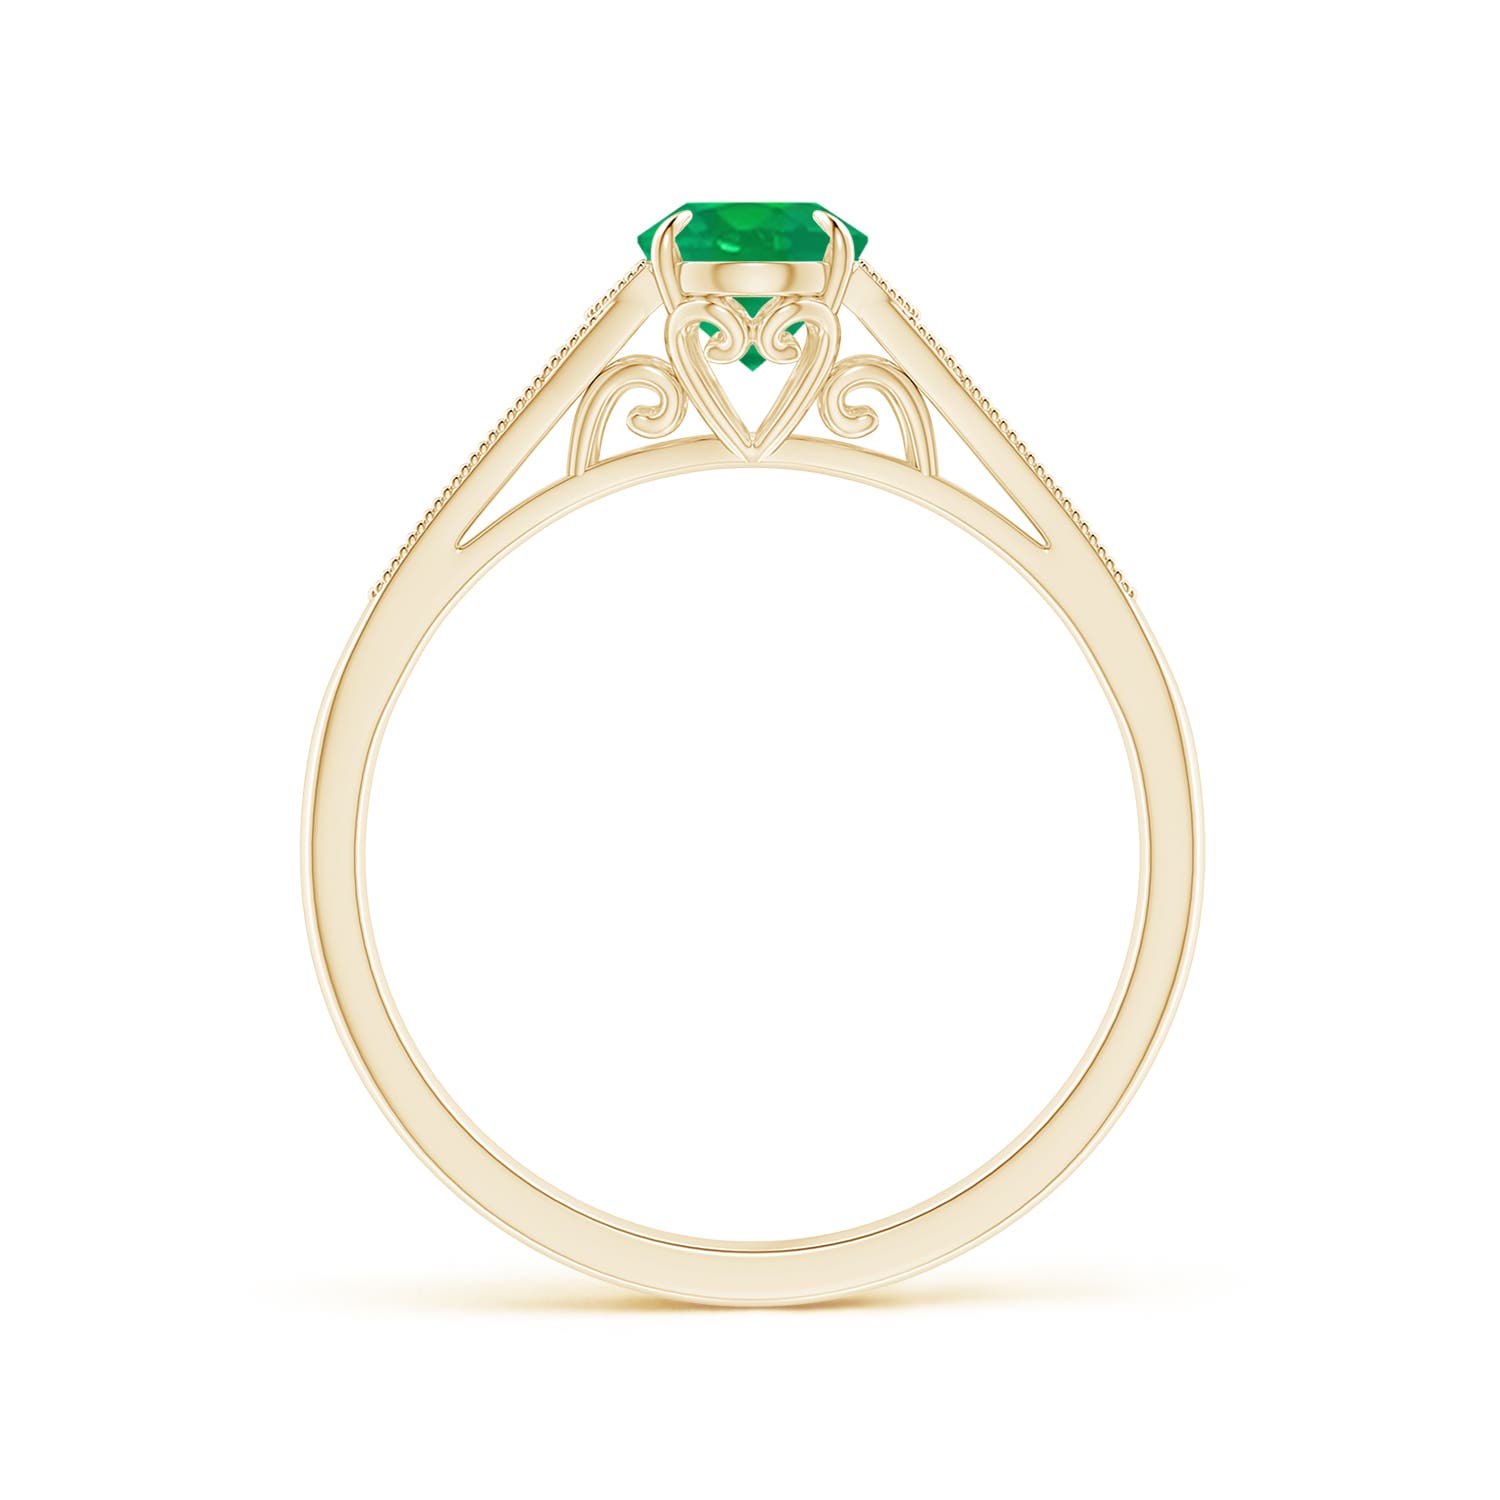 AA - Emerald / 0.77 CT / 14 KT Yellow Gold